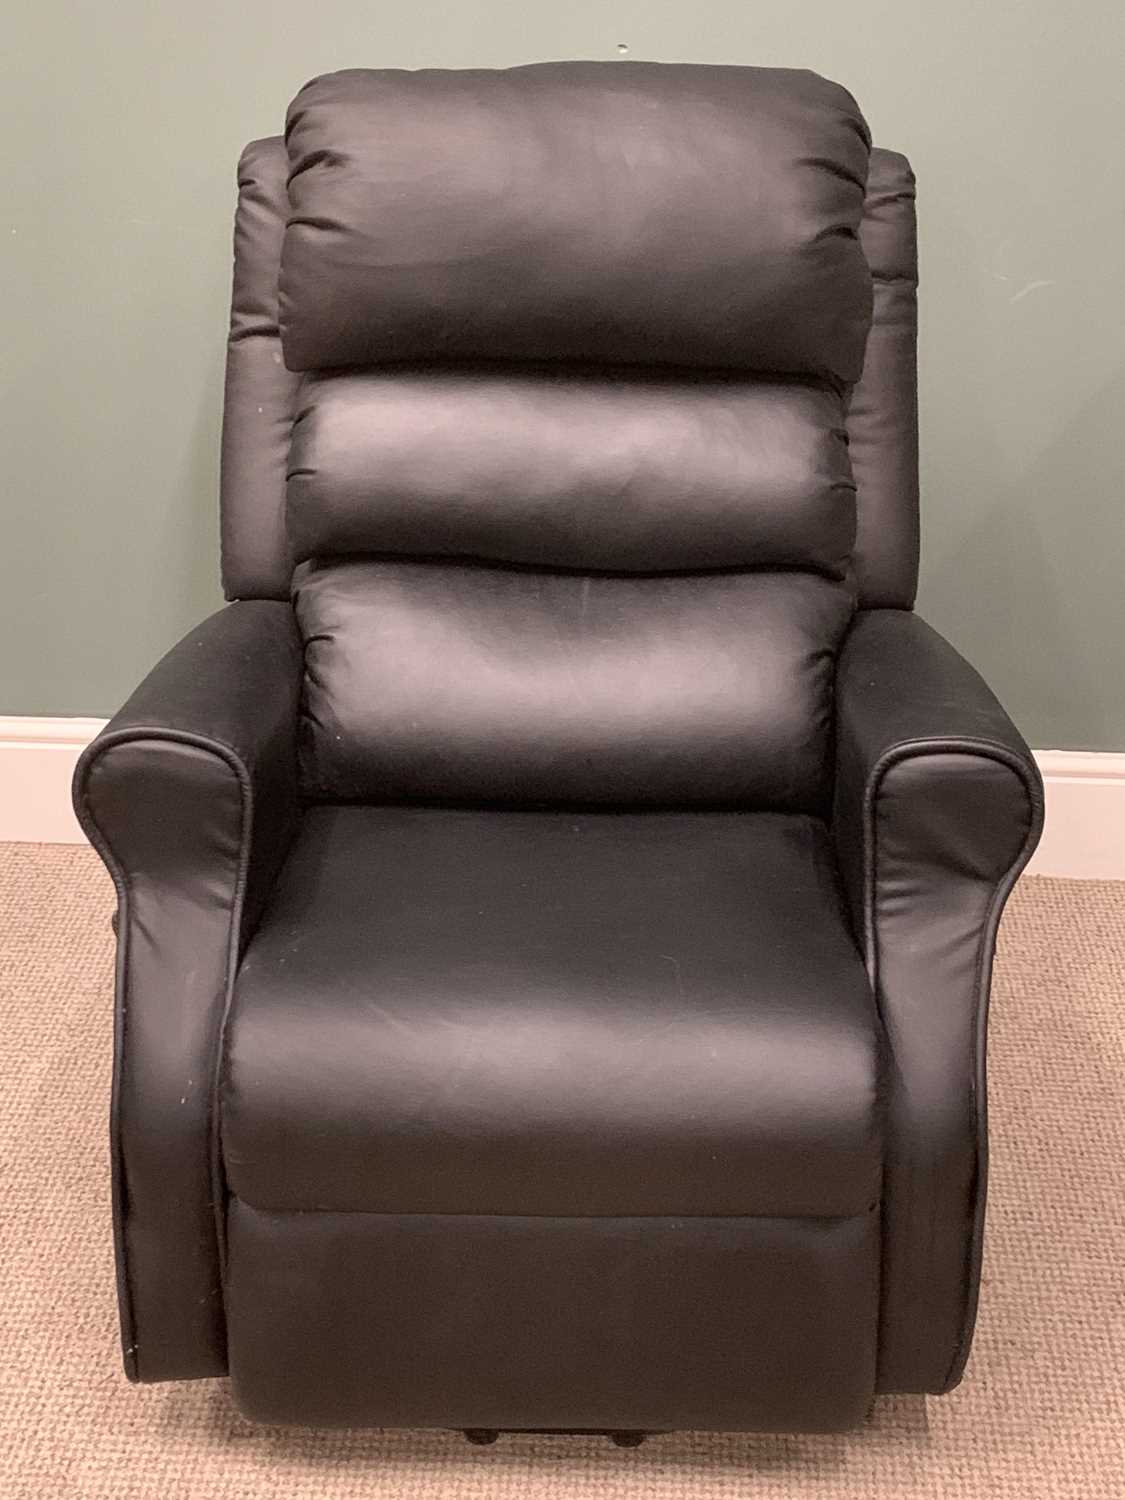 BLACK SOFT LEATHER EFFECT ELECTRIC RECLINING ARMCHAIR, 104 (h) x 79 (w) x 49cms (seat d), ET - Image 2 of 4